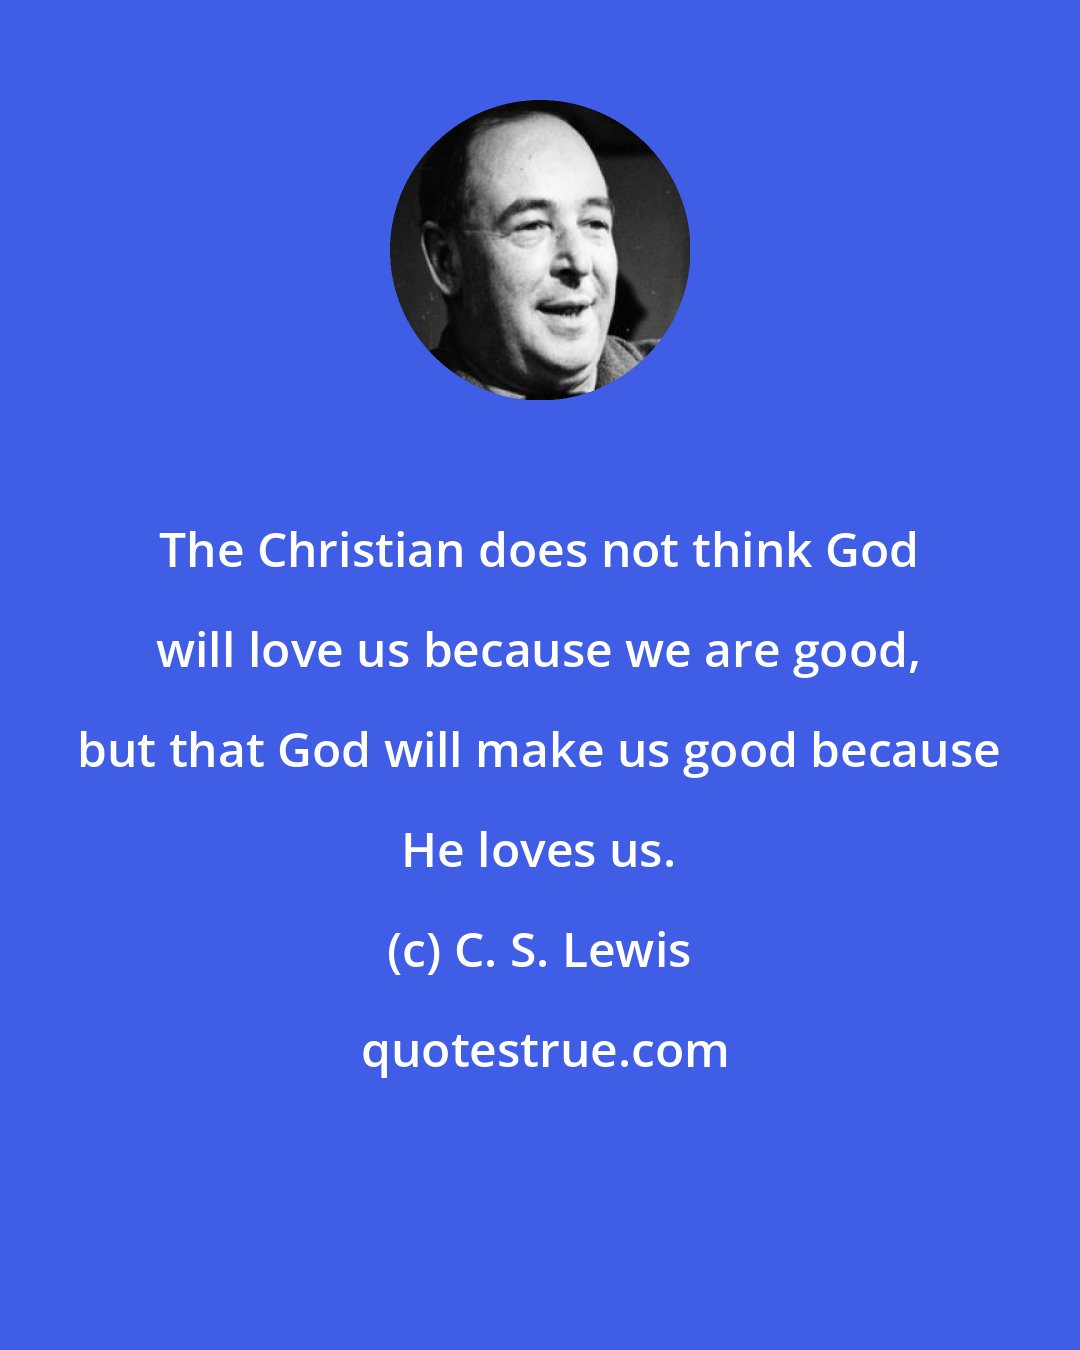 C. S. Lewis: The Christian does not think God will love us because we are good, but that God will make us good because He loves us.